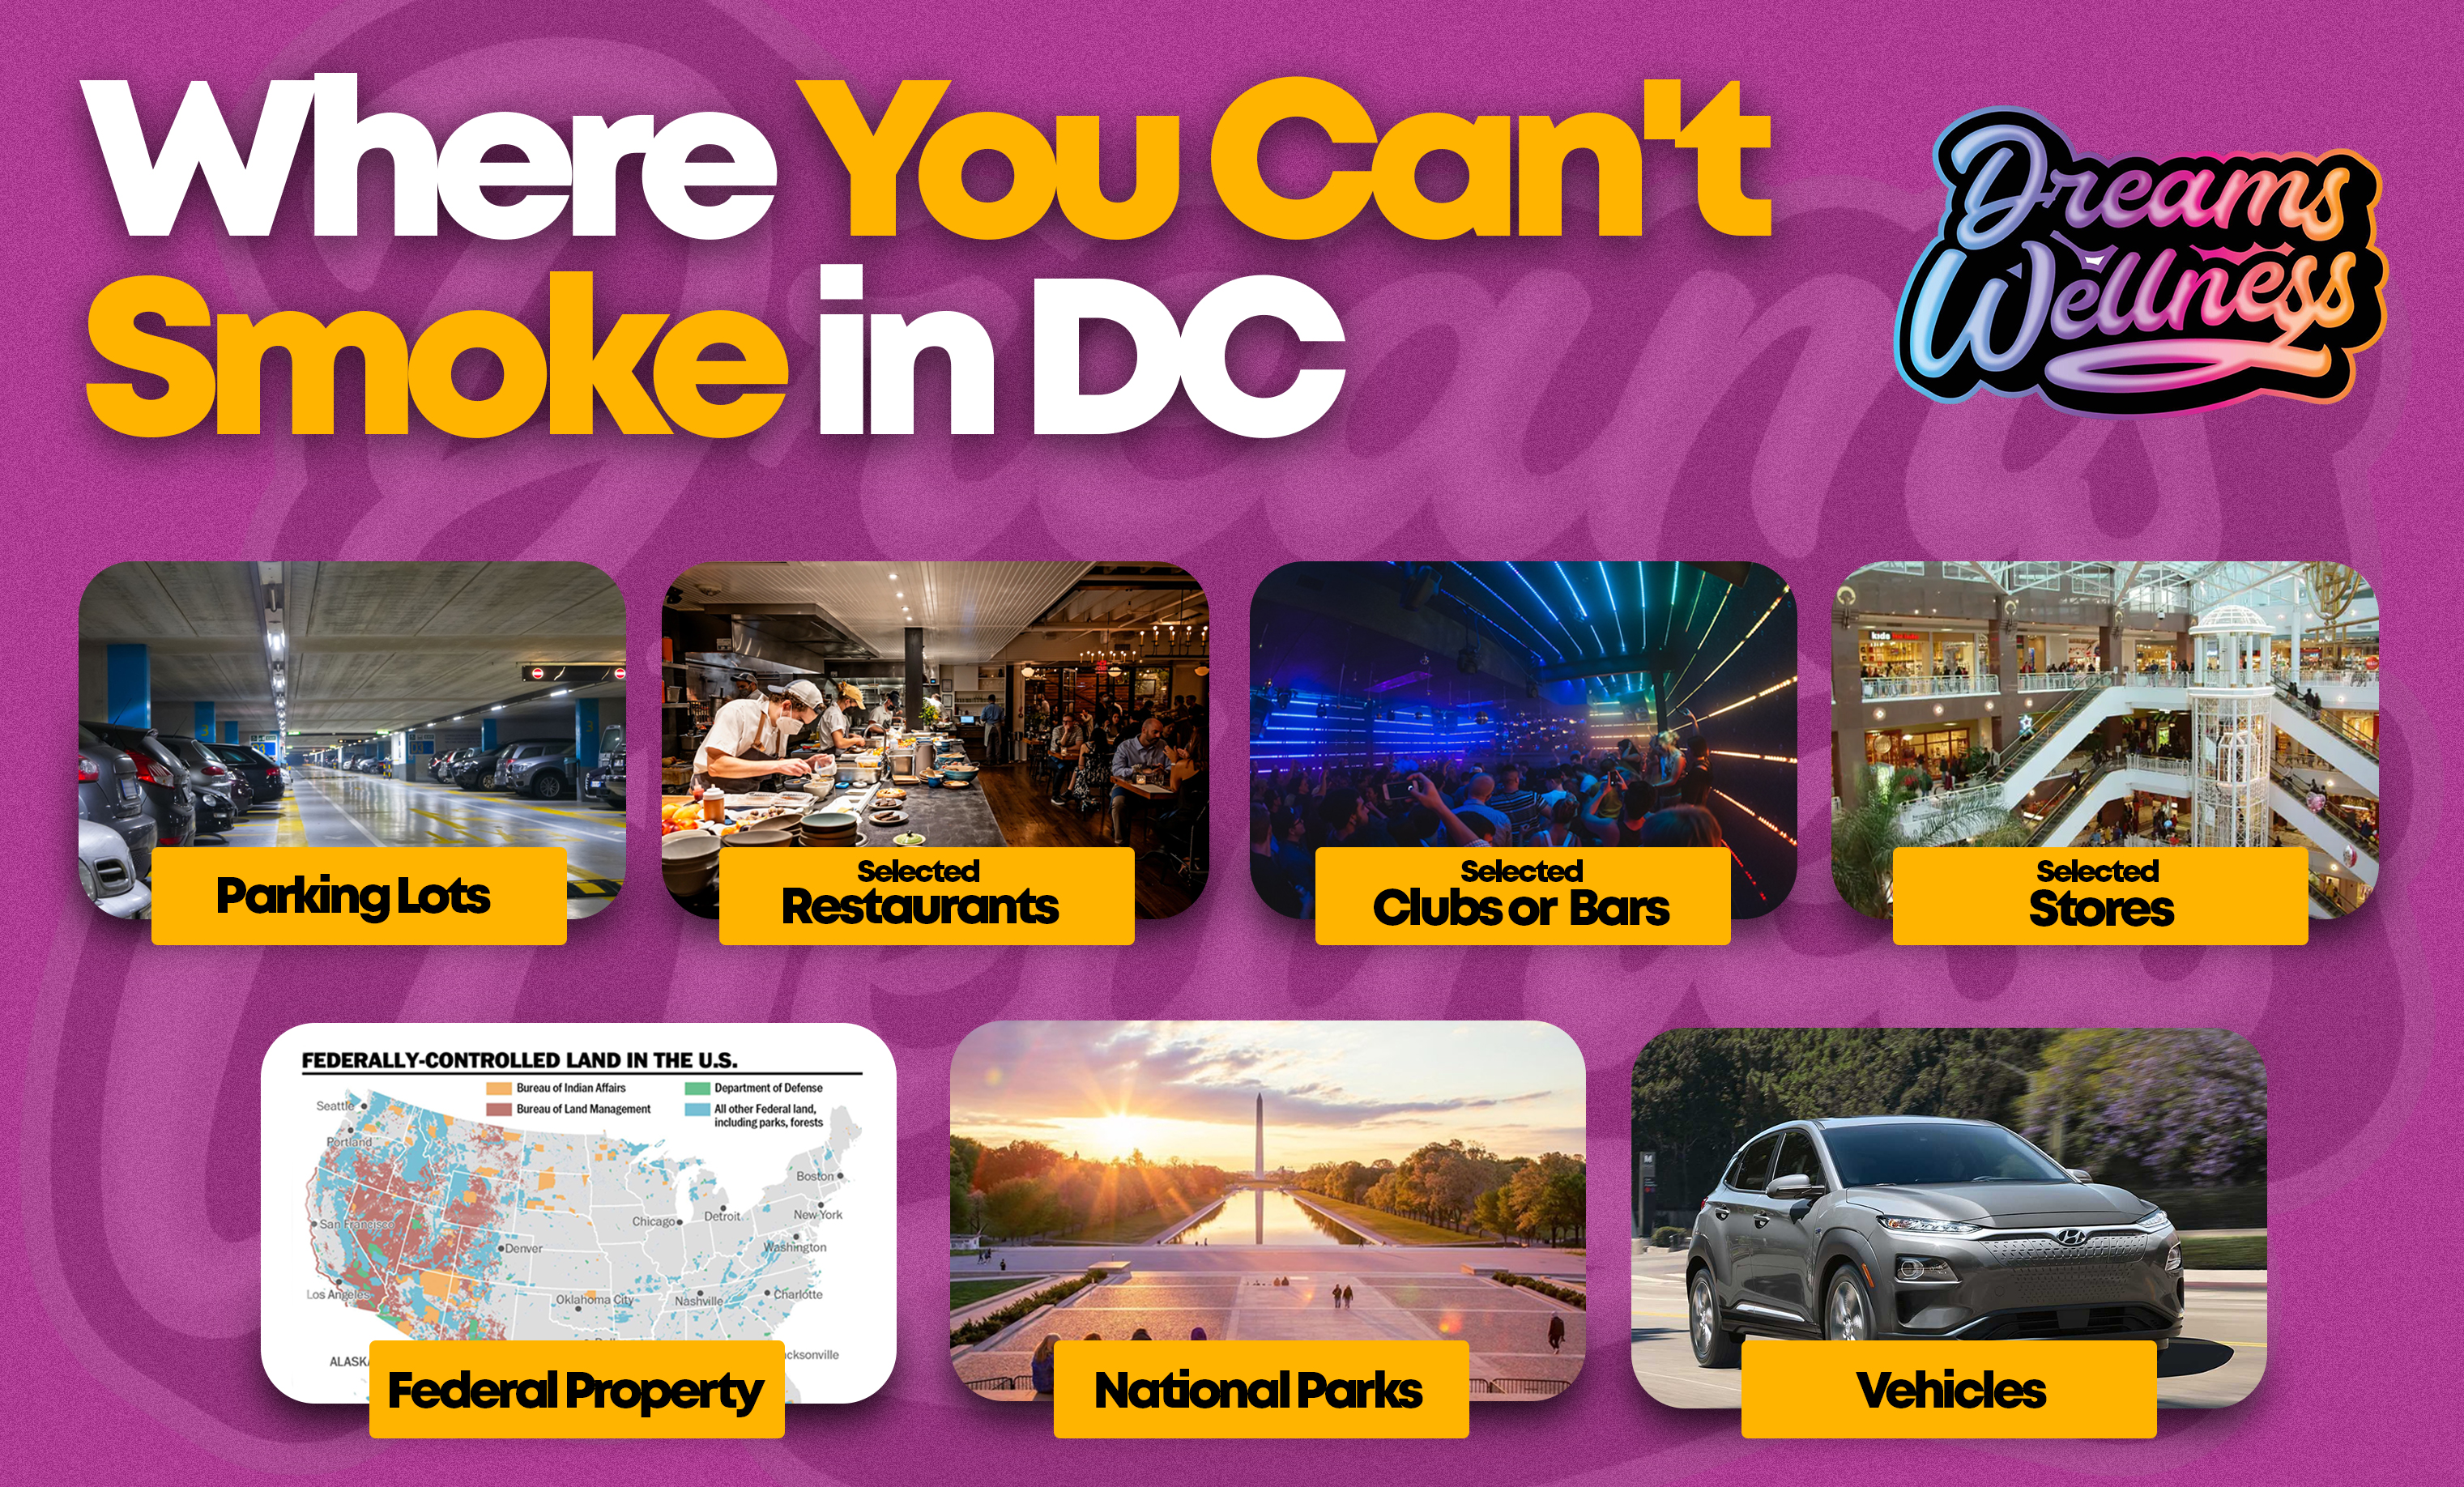 where you can't smoke in dc